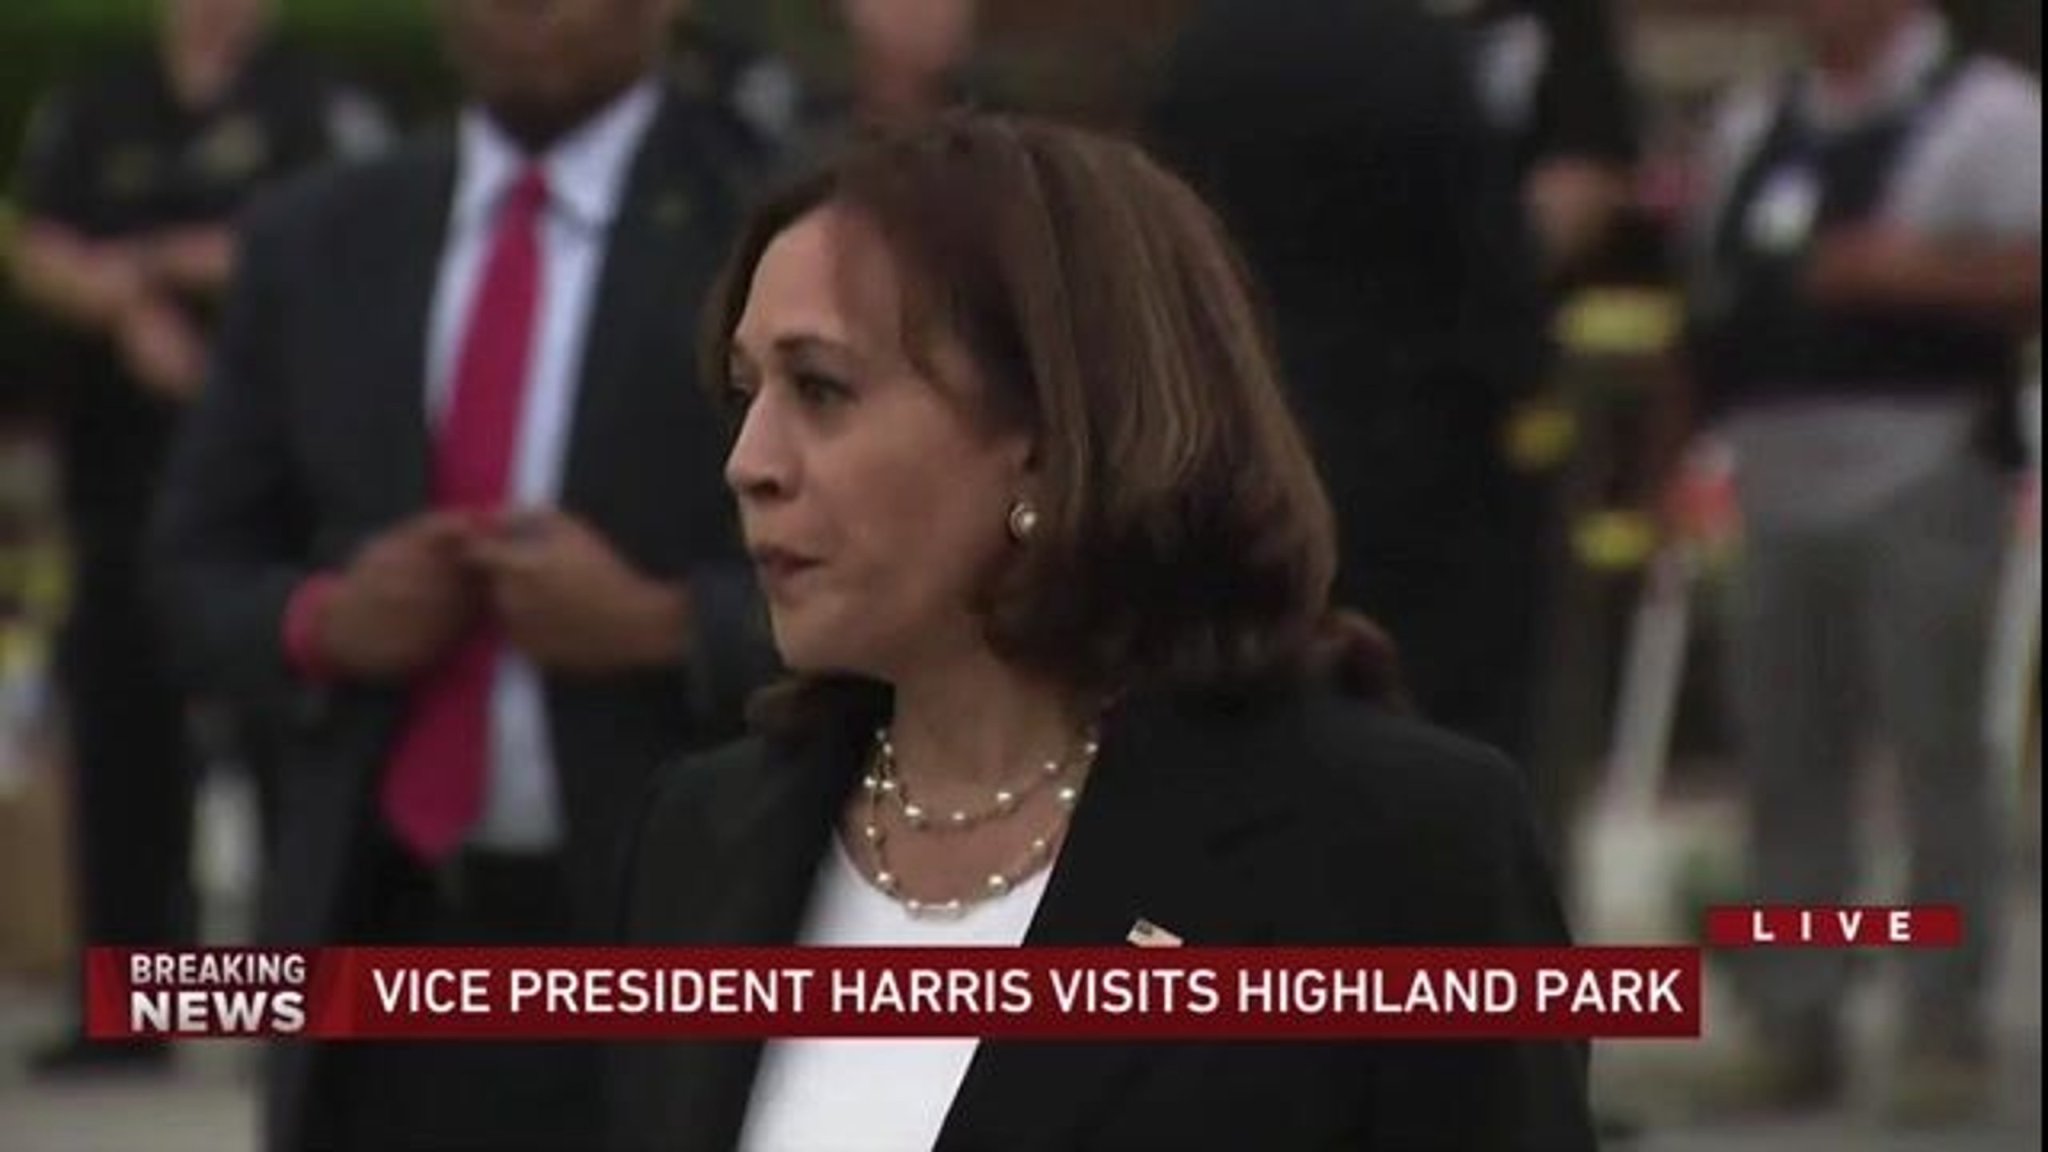 VP Kamala Harris renews call to regulate assault weapons in Highland Park after July 4th parade mass shooting.